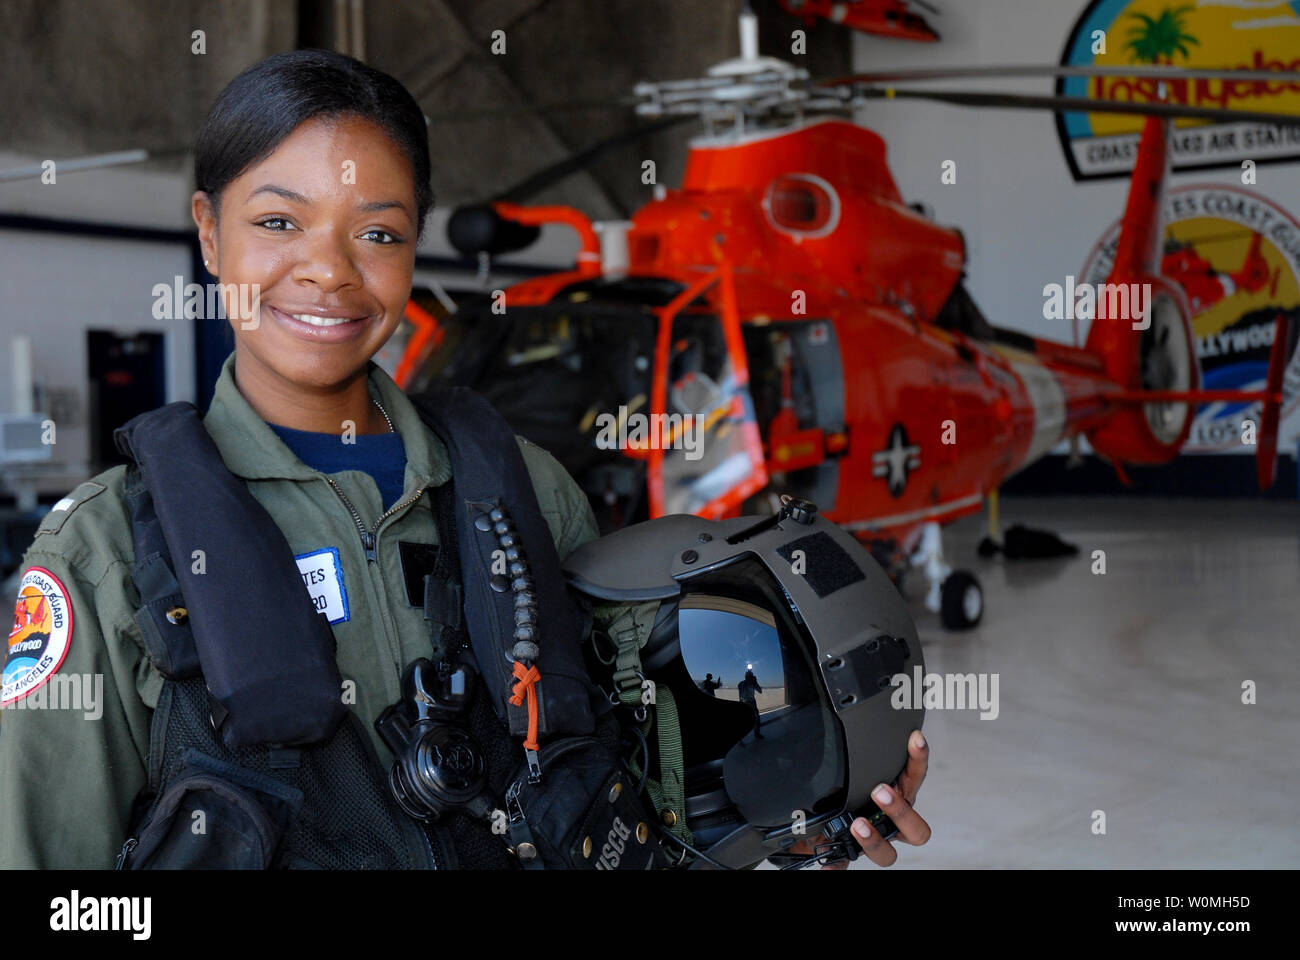 Lt. j.g. Lashanda Holmes stands in front of an MH-65 Dolphin helicopter at Air Station Los Angeles, California on August 17, 2010. Holmes, from Fayetteville, North Carolina, is the first female African-American helicopter pilot in the Coast Guard. UPI/Adam Eggers/U.S. Coast Guard Stock Photo